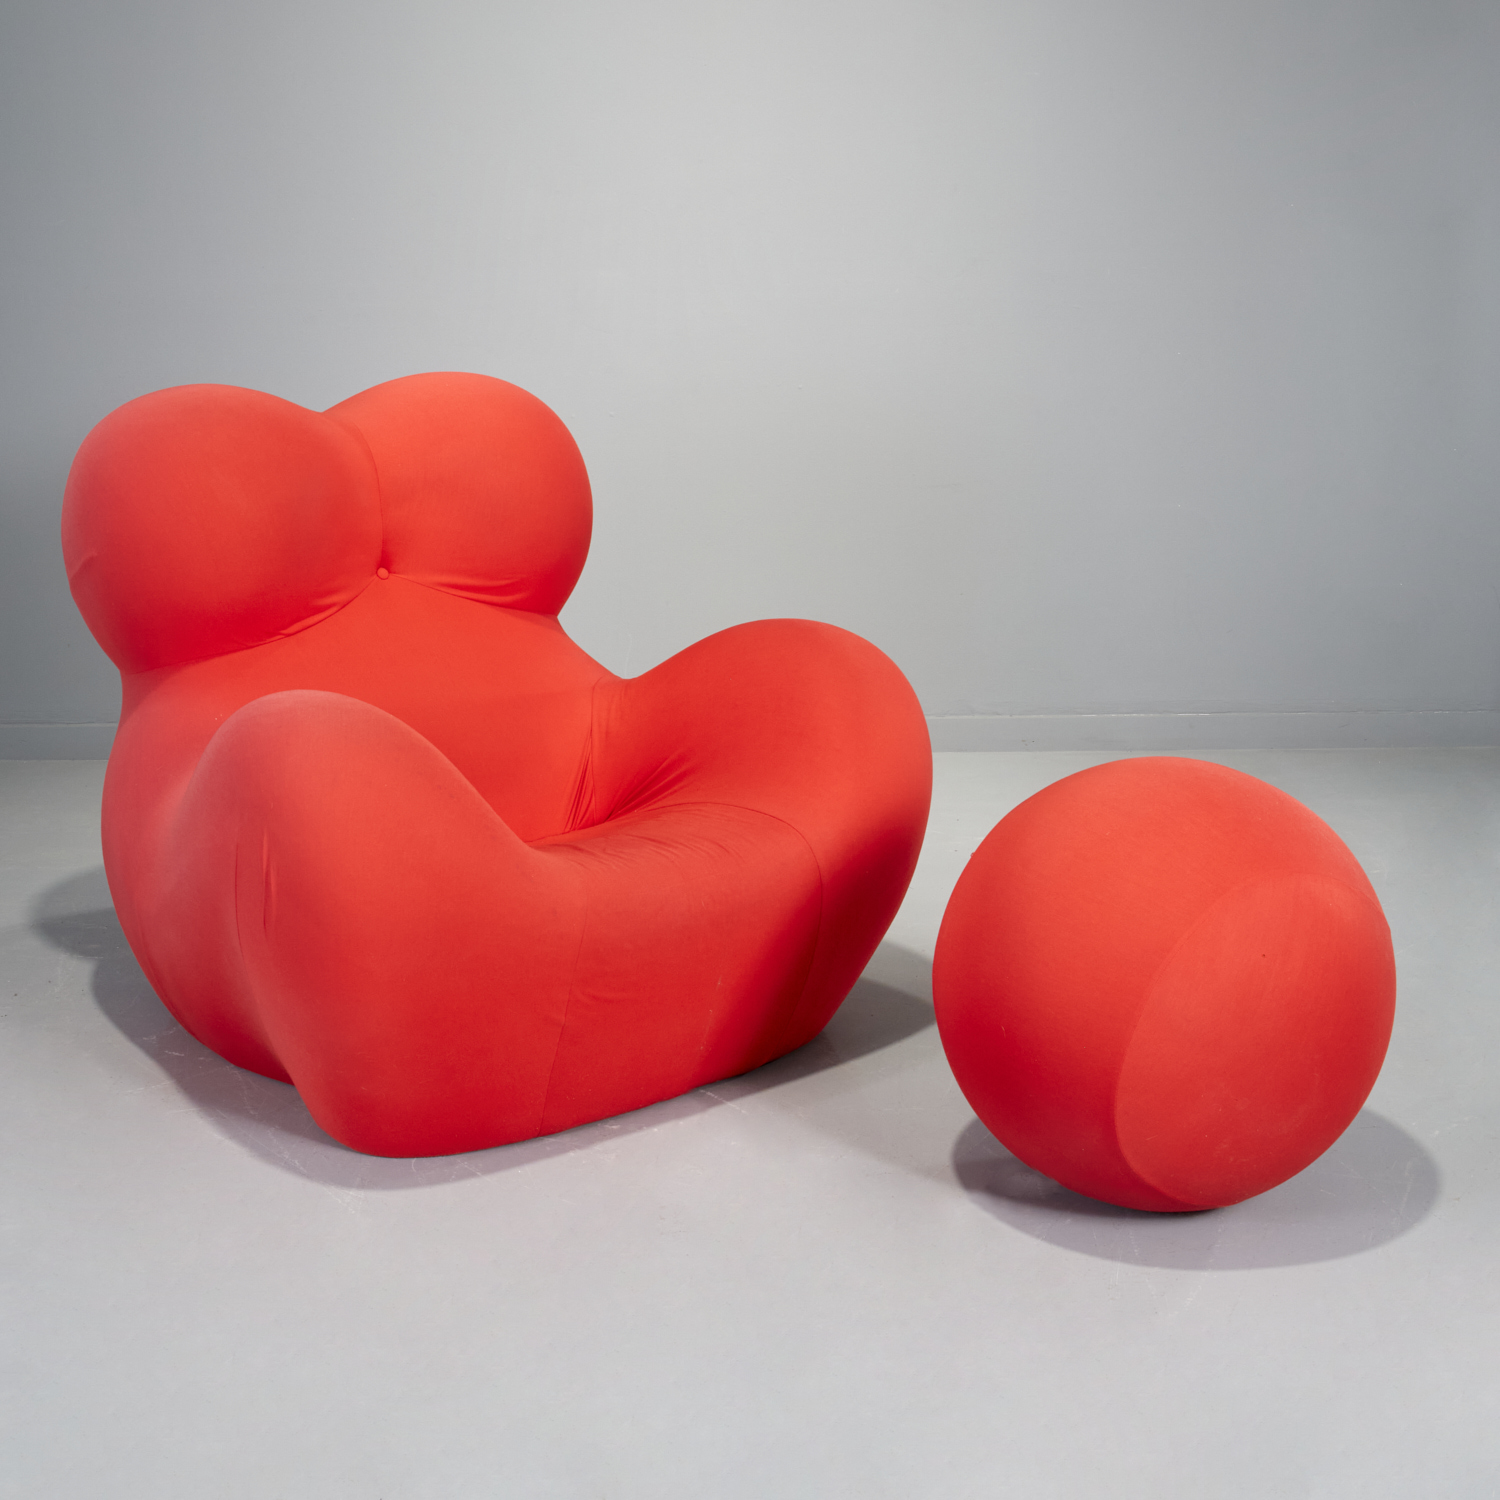 GAETANO PESCE UP CHAIR AND BALL 360d41